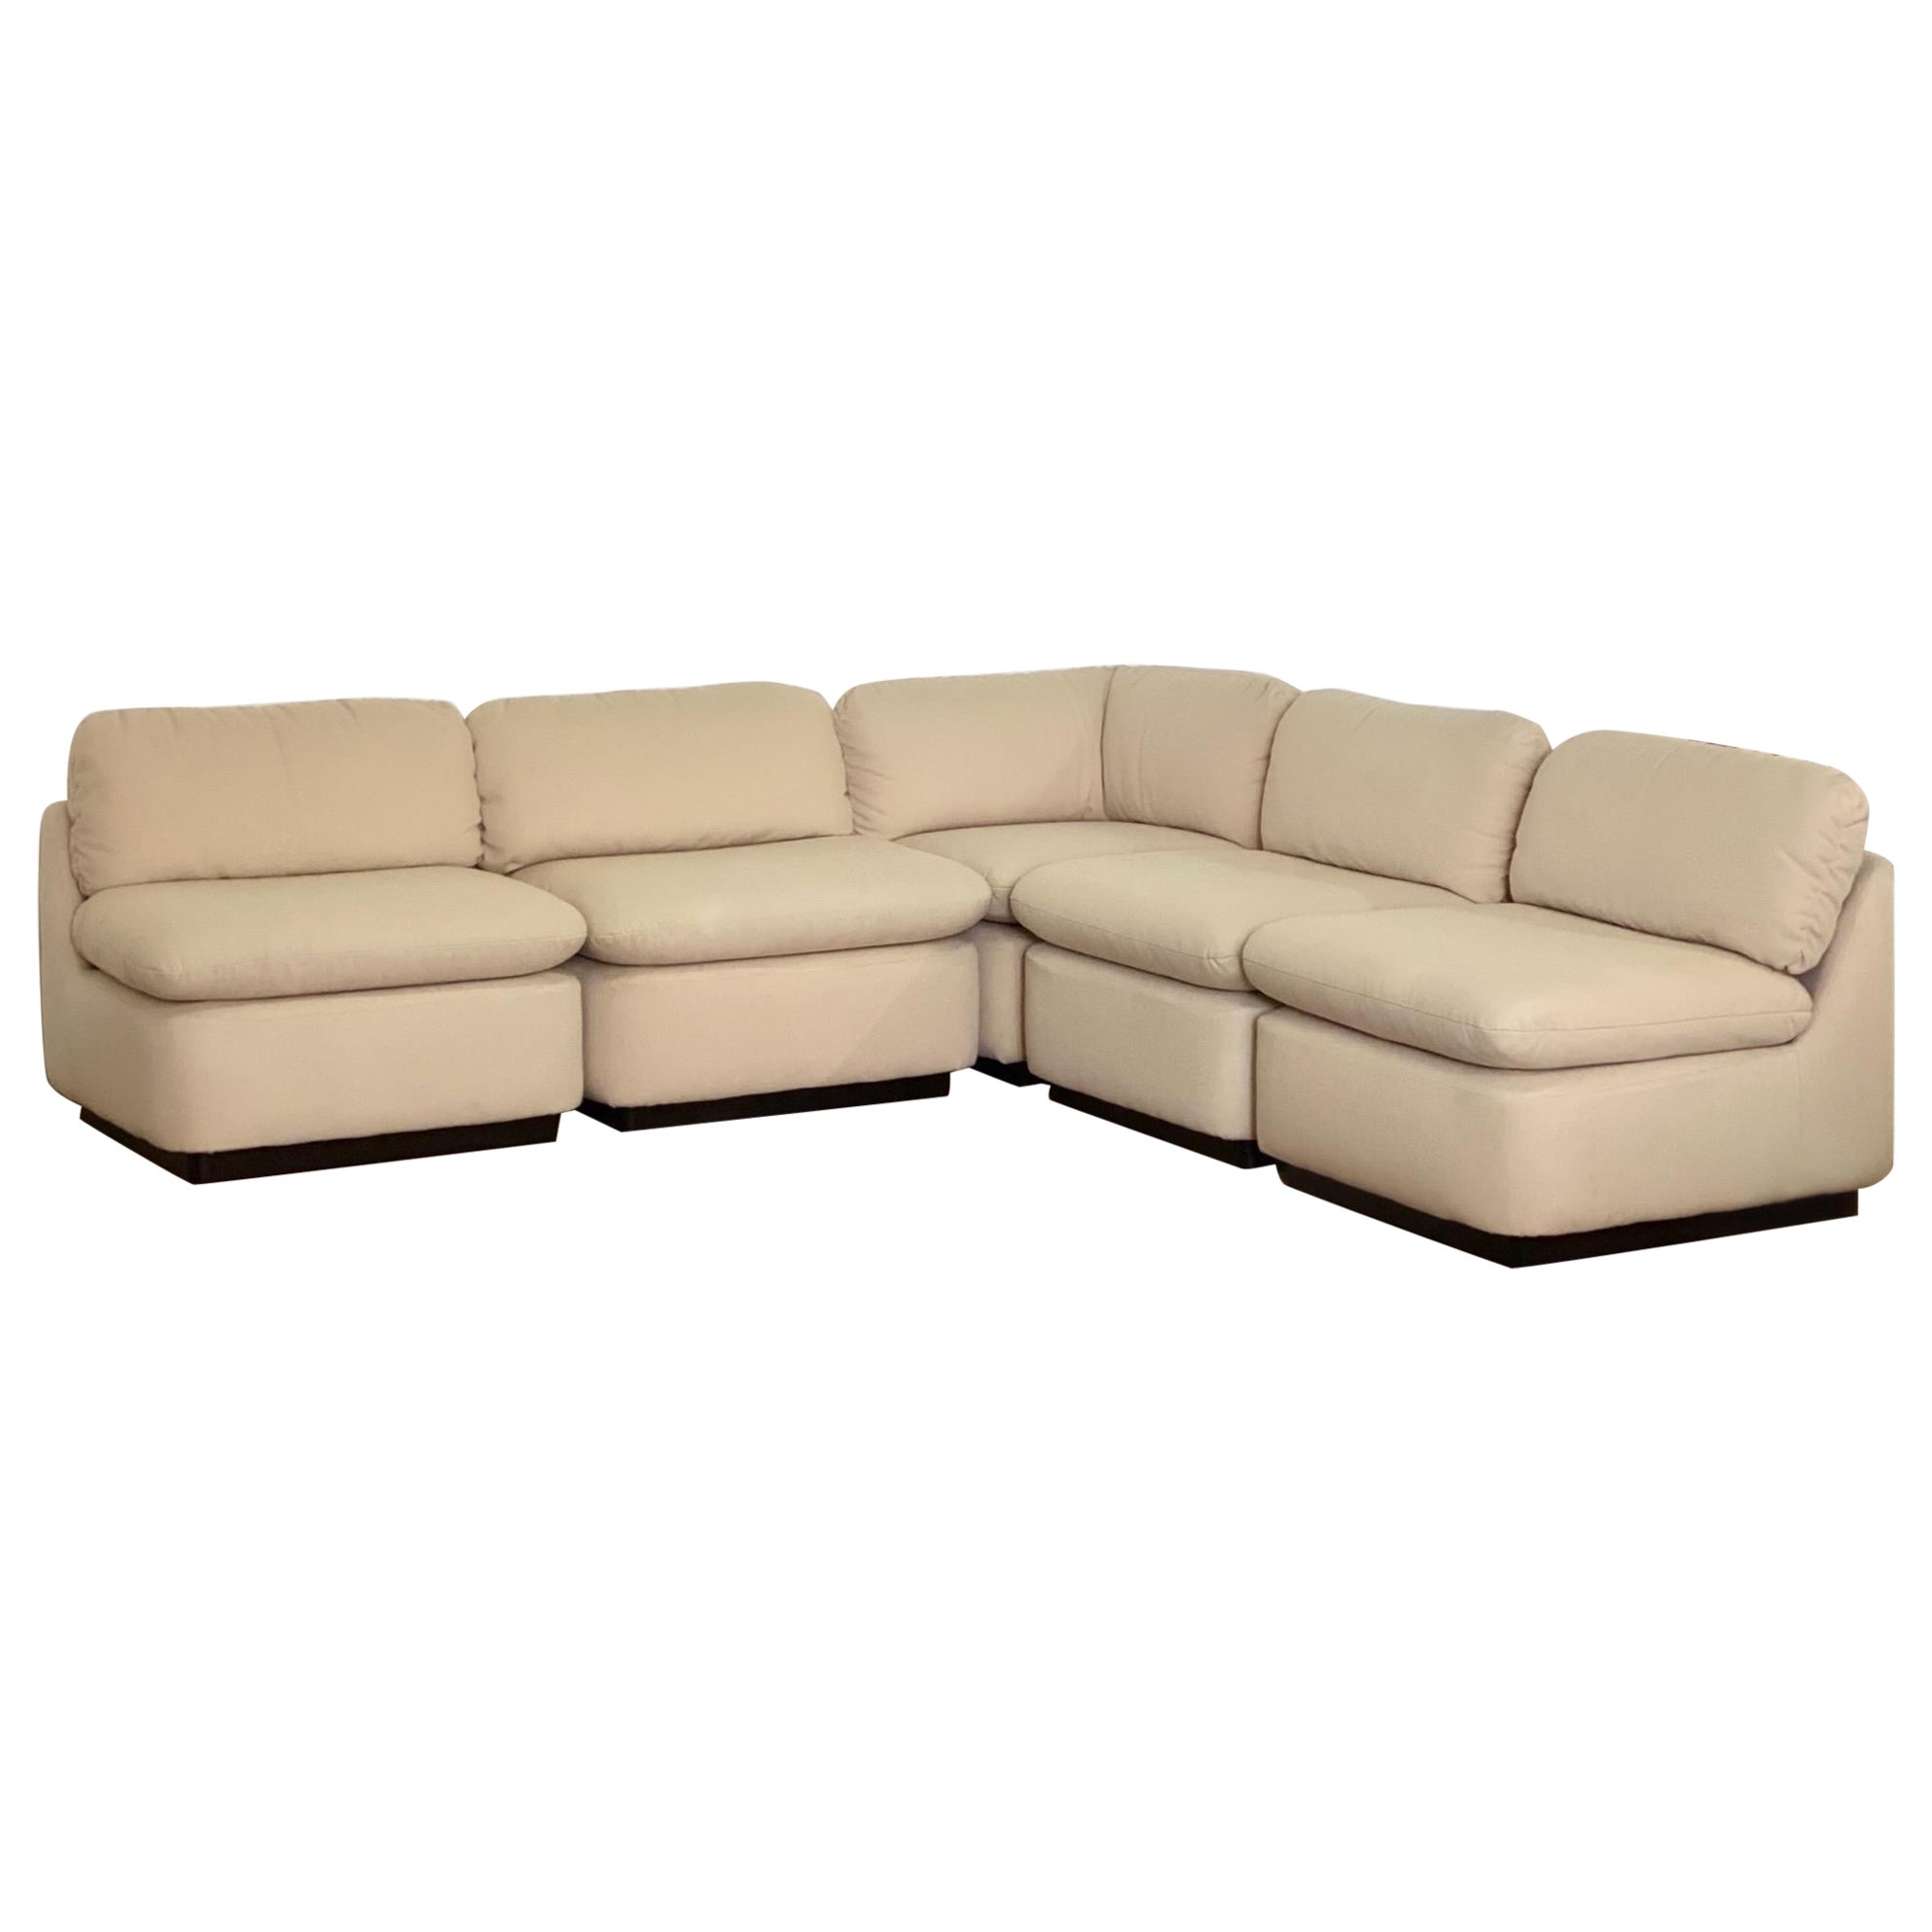 1990 Directional White Ivory Five Piece Modular Lounge Sectional - 5 Pieces